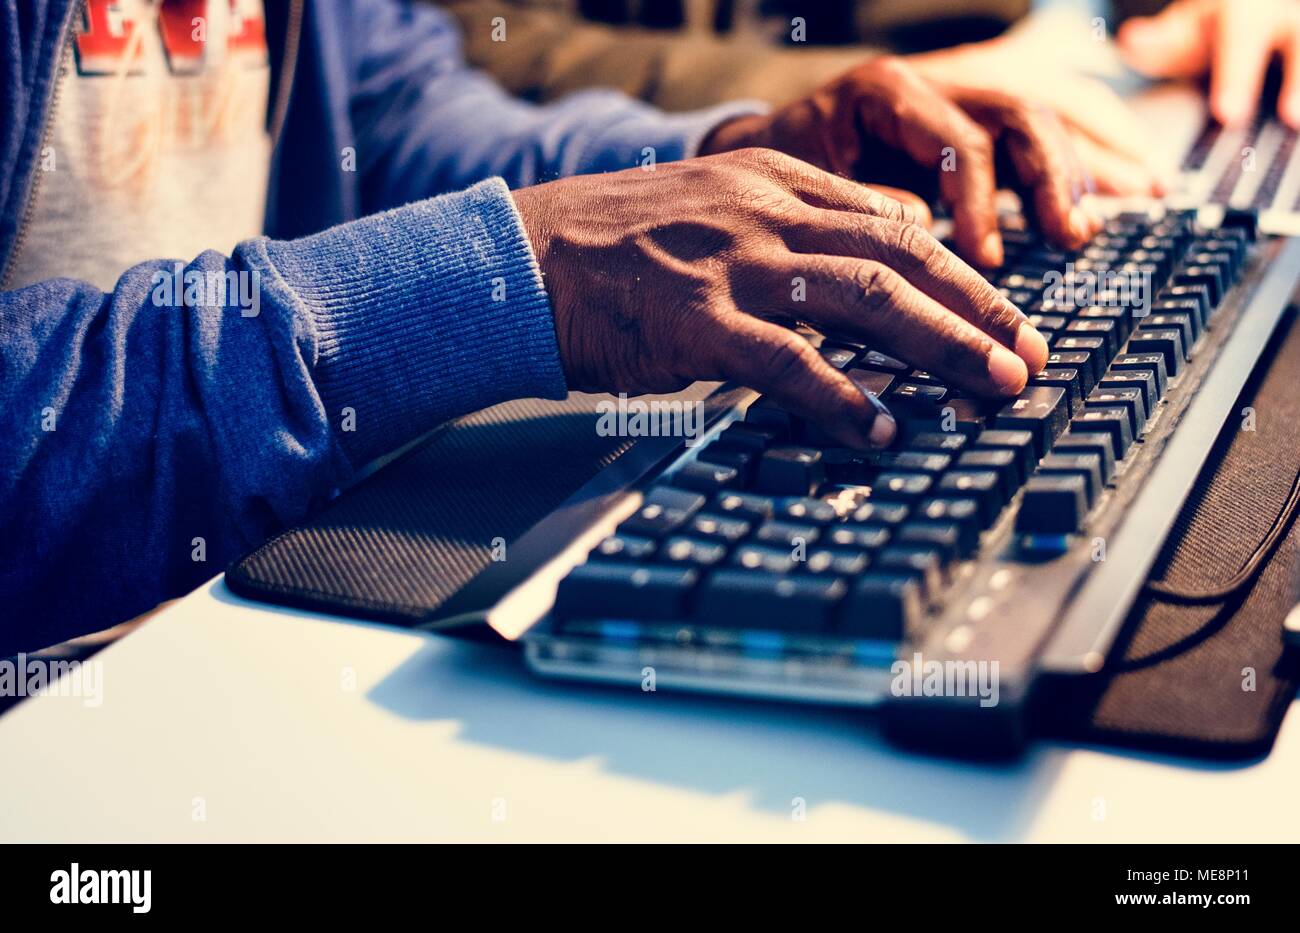 Closeup of hands working on computer keyboard Banque D'Images